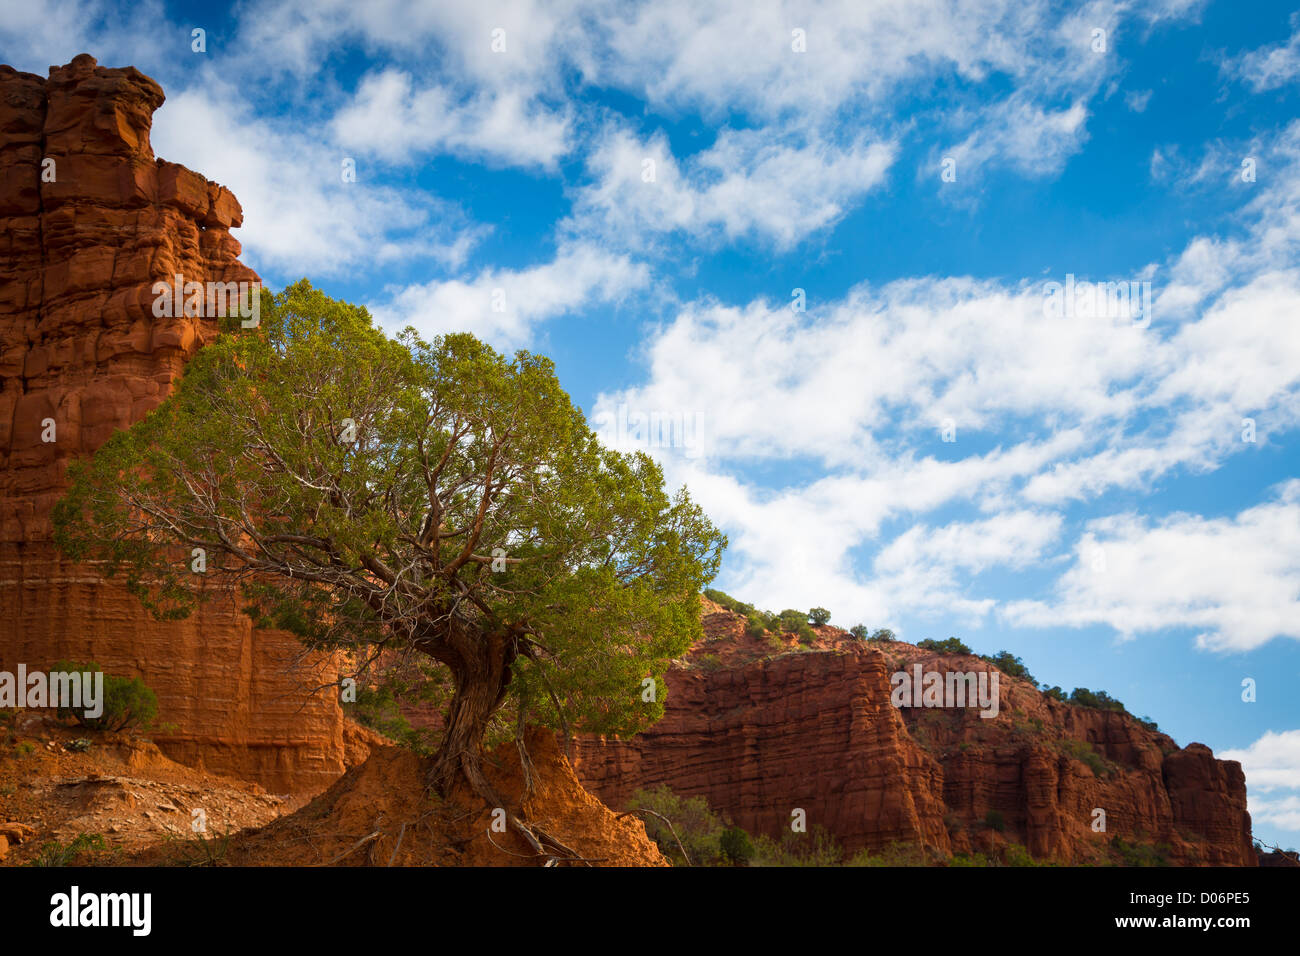 Wacholder im Southprong Bereich der Caprock Canyon State Park, Texas Stockfoto